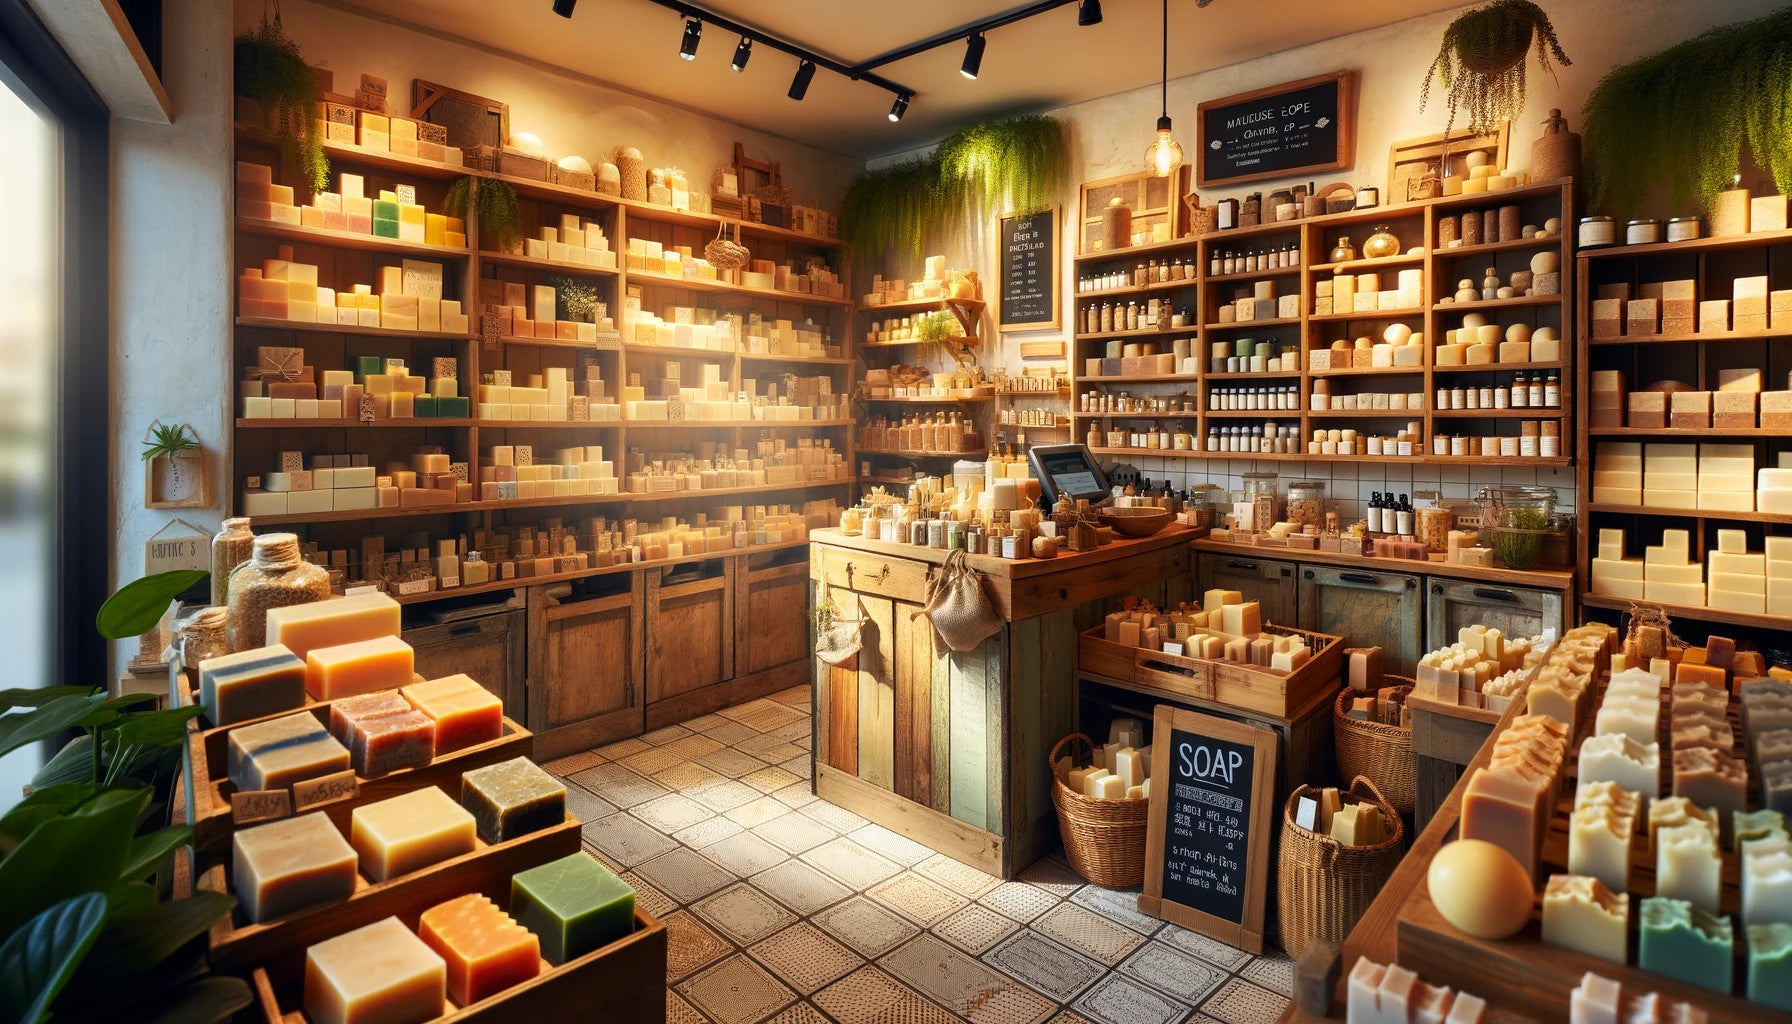 The image depicts a cozy and inviting interior of a handmade soap shop. It features wooden shelves filled with an array of handmade soaps in various shapes and colors, each labeled to indicate natural ingredients.